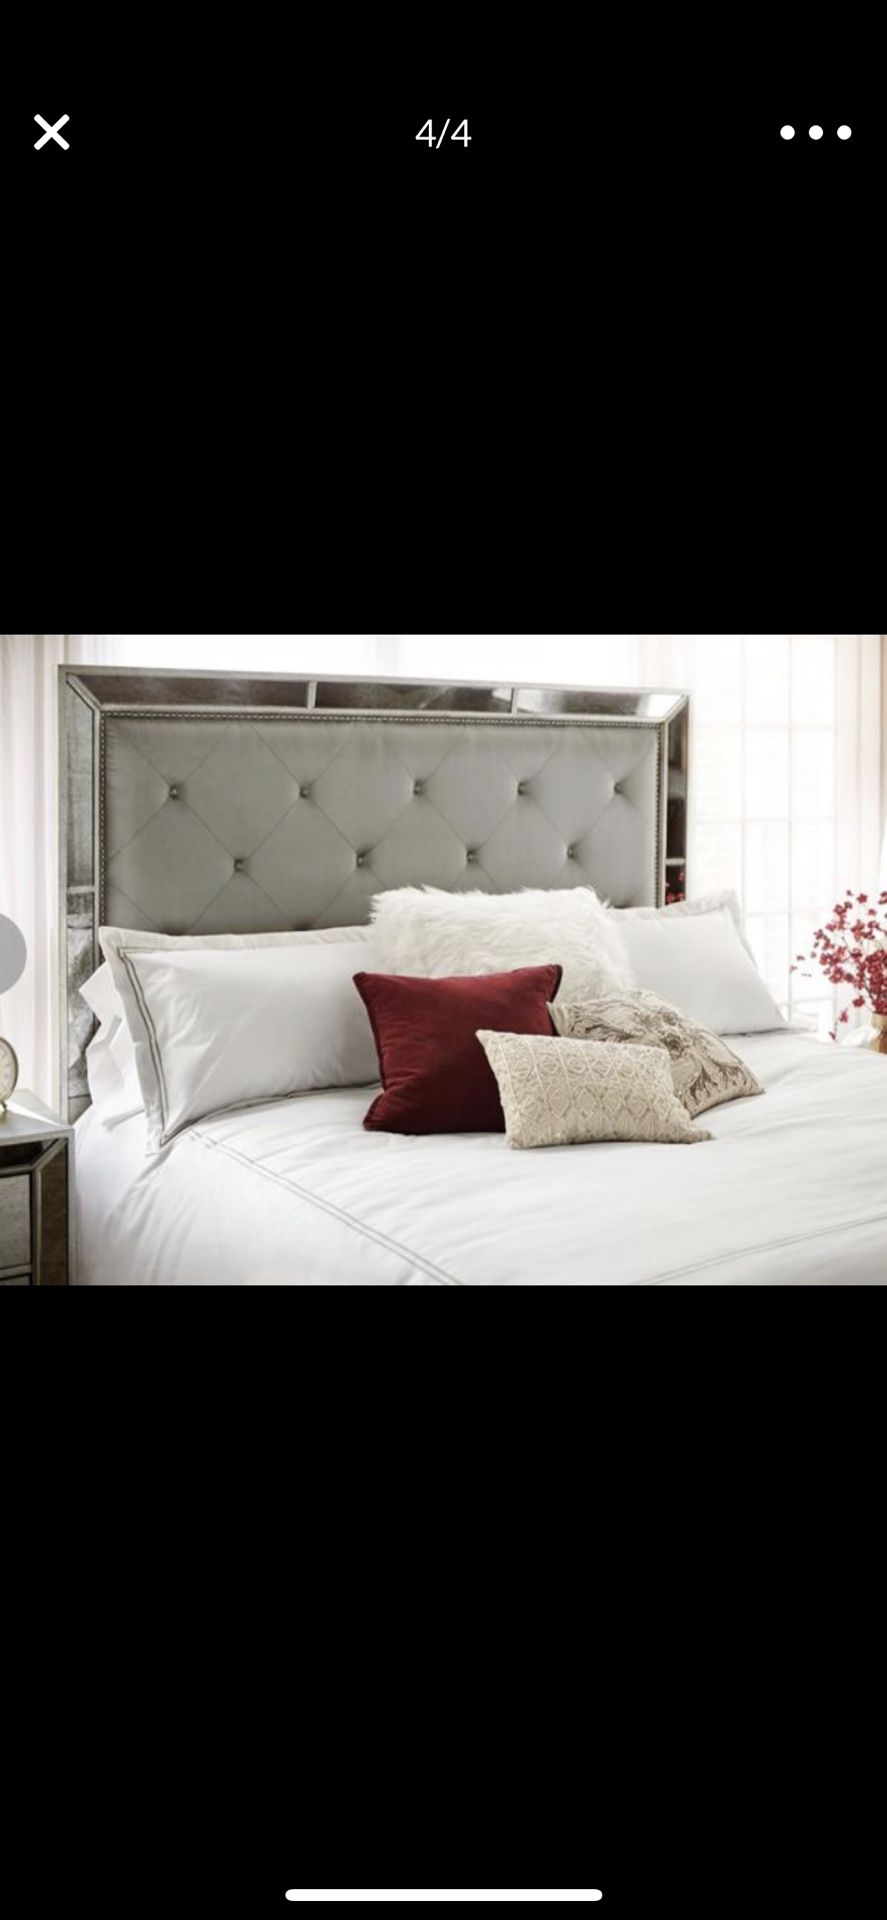 King size headboard and bed frame